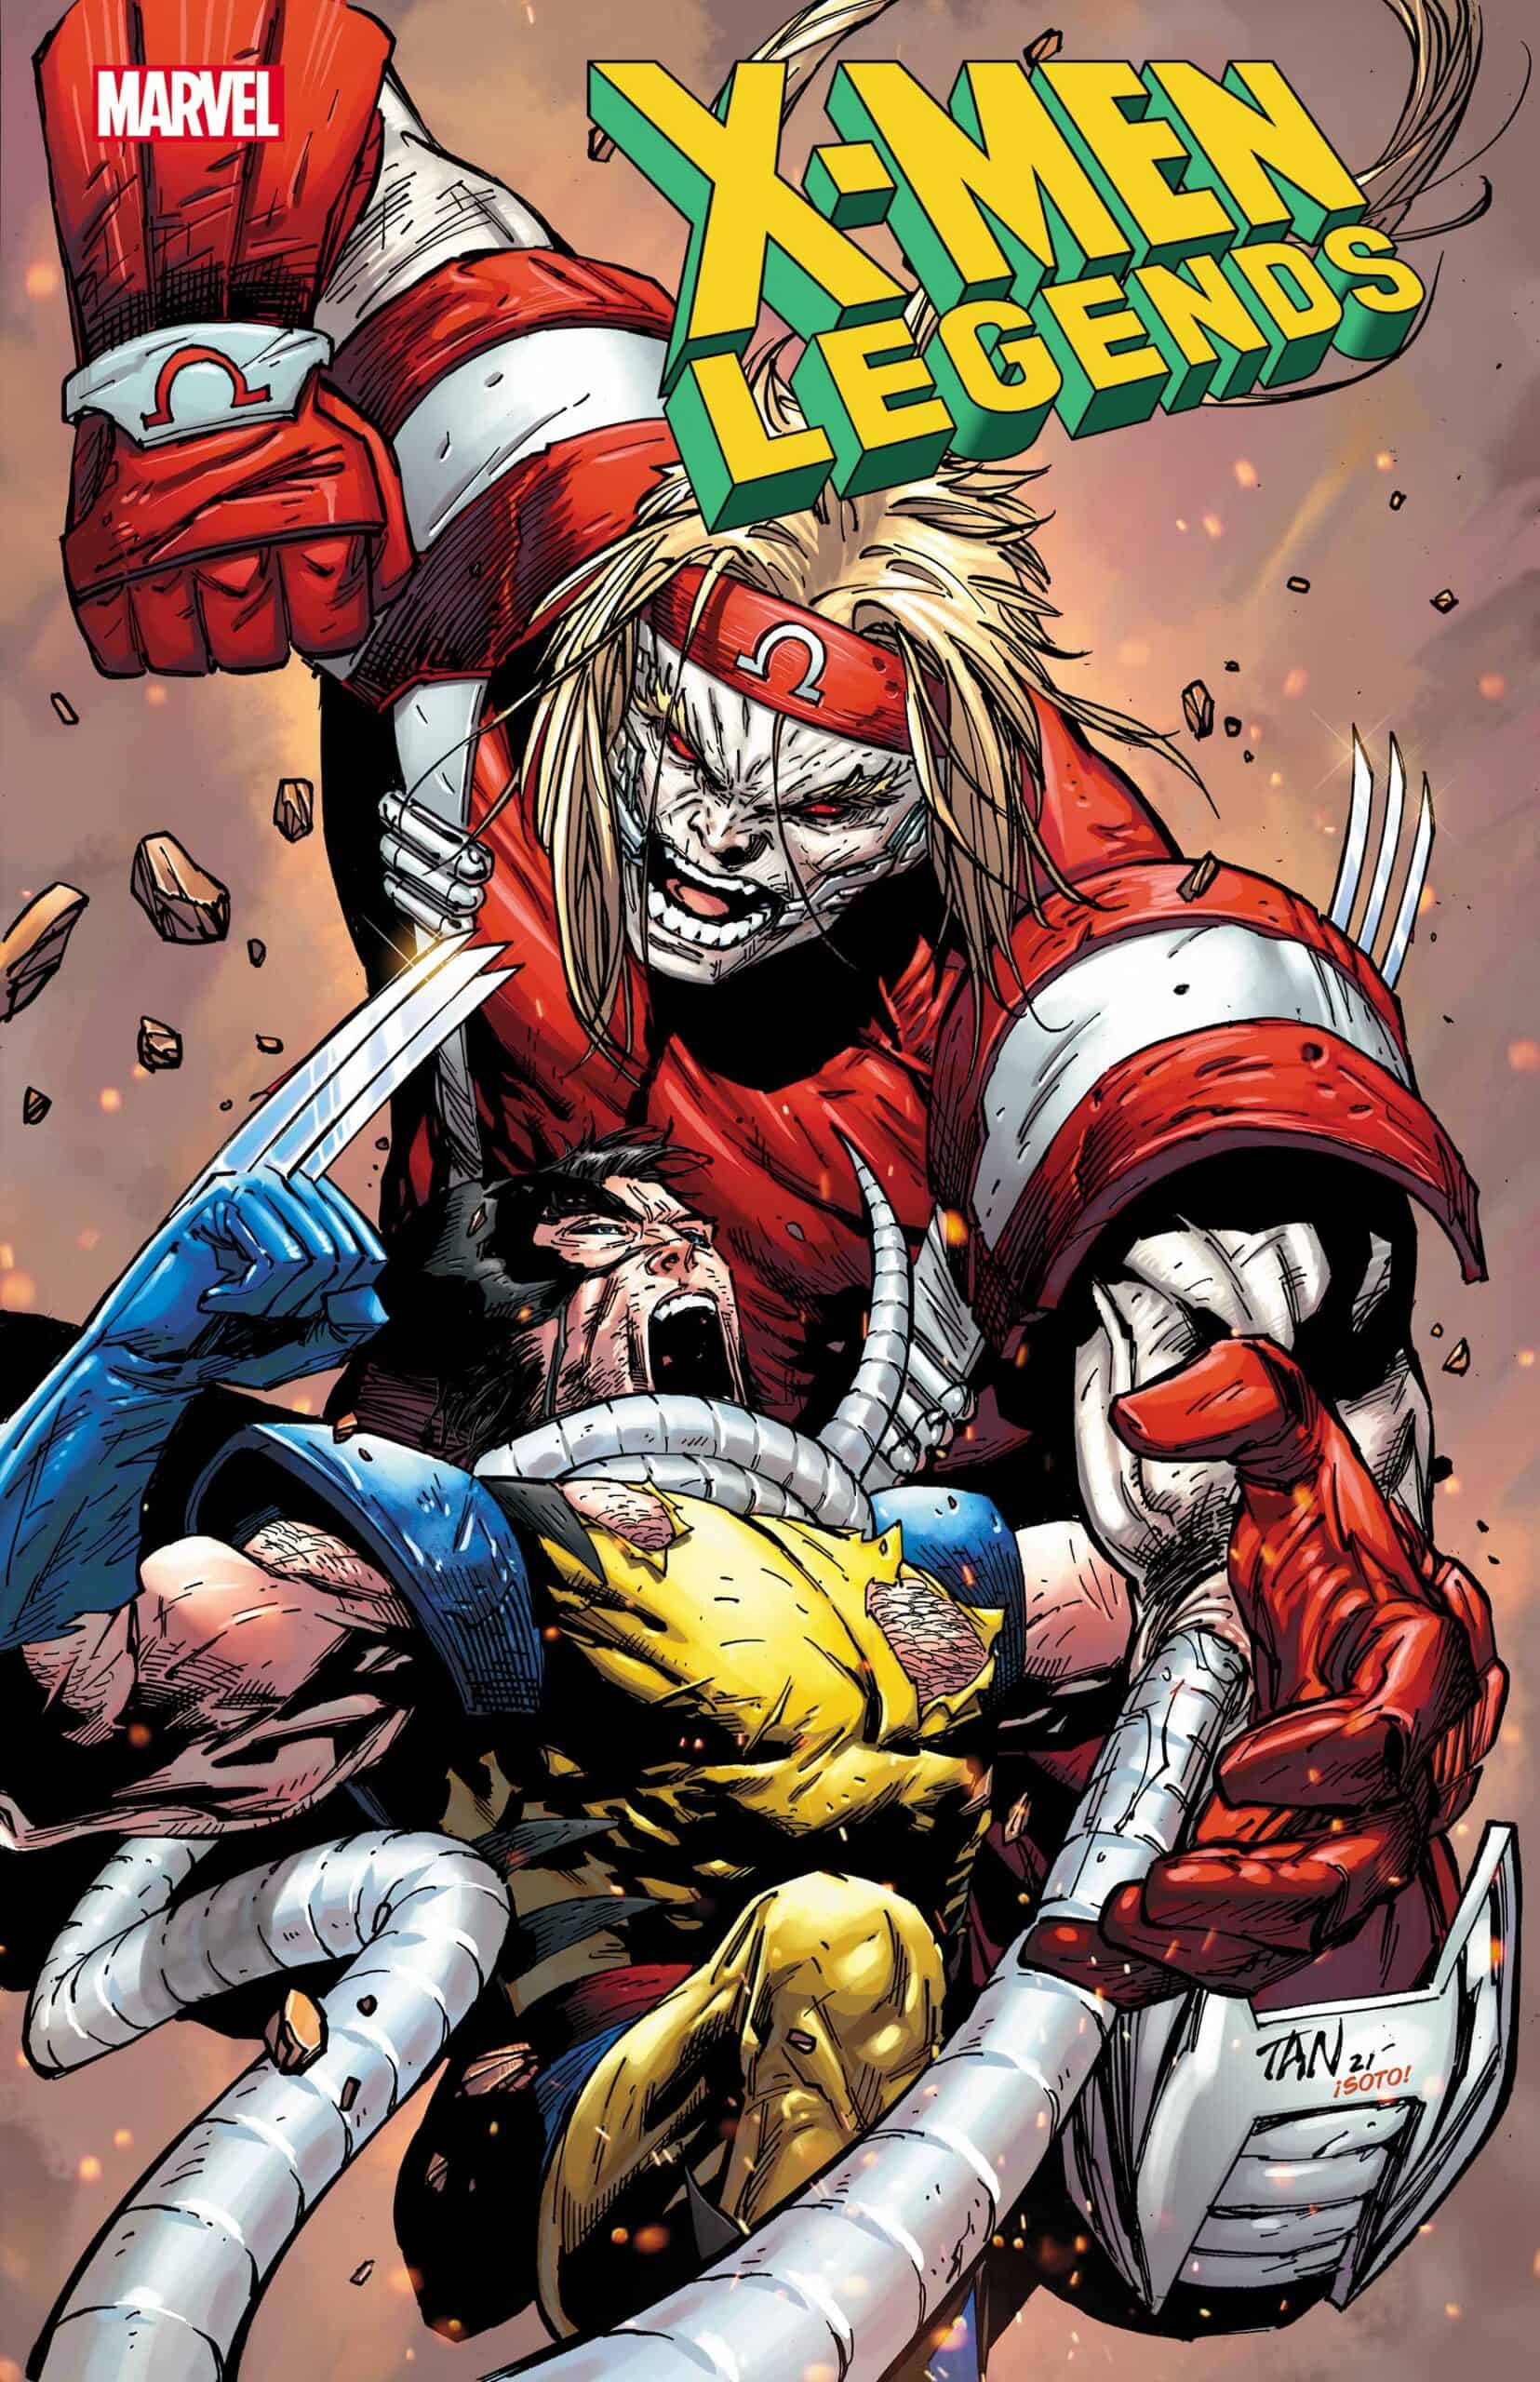 Europa udbrud Forudsige NEWS WATCH: ENTER OMEGA RED! In the EXCLUSIVE First Look at the X-MEN  LEGENDS #8 Cover and Solicit - Comic Watch